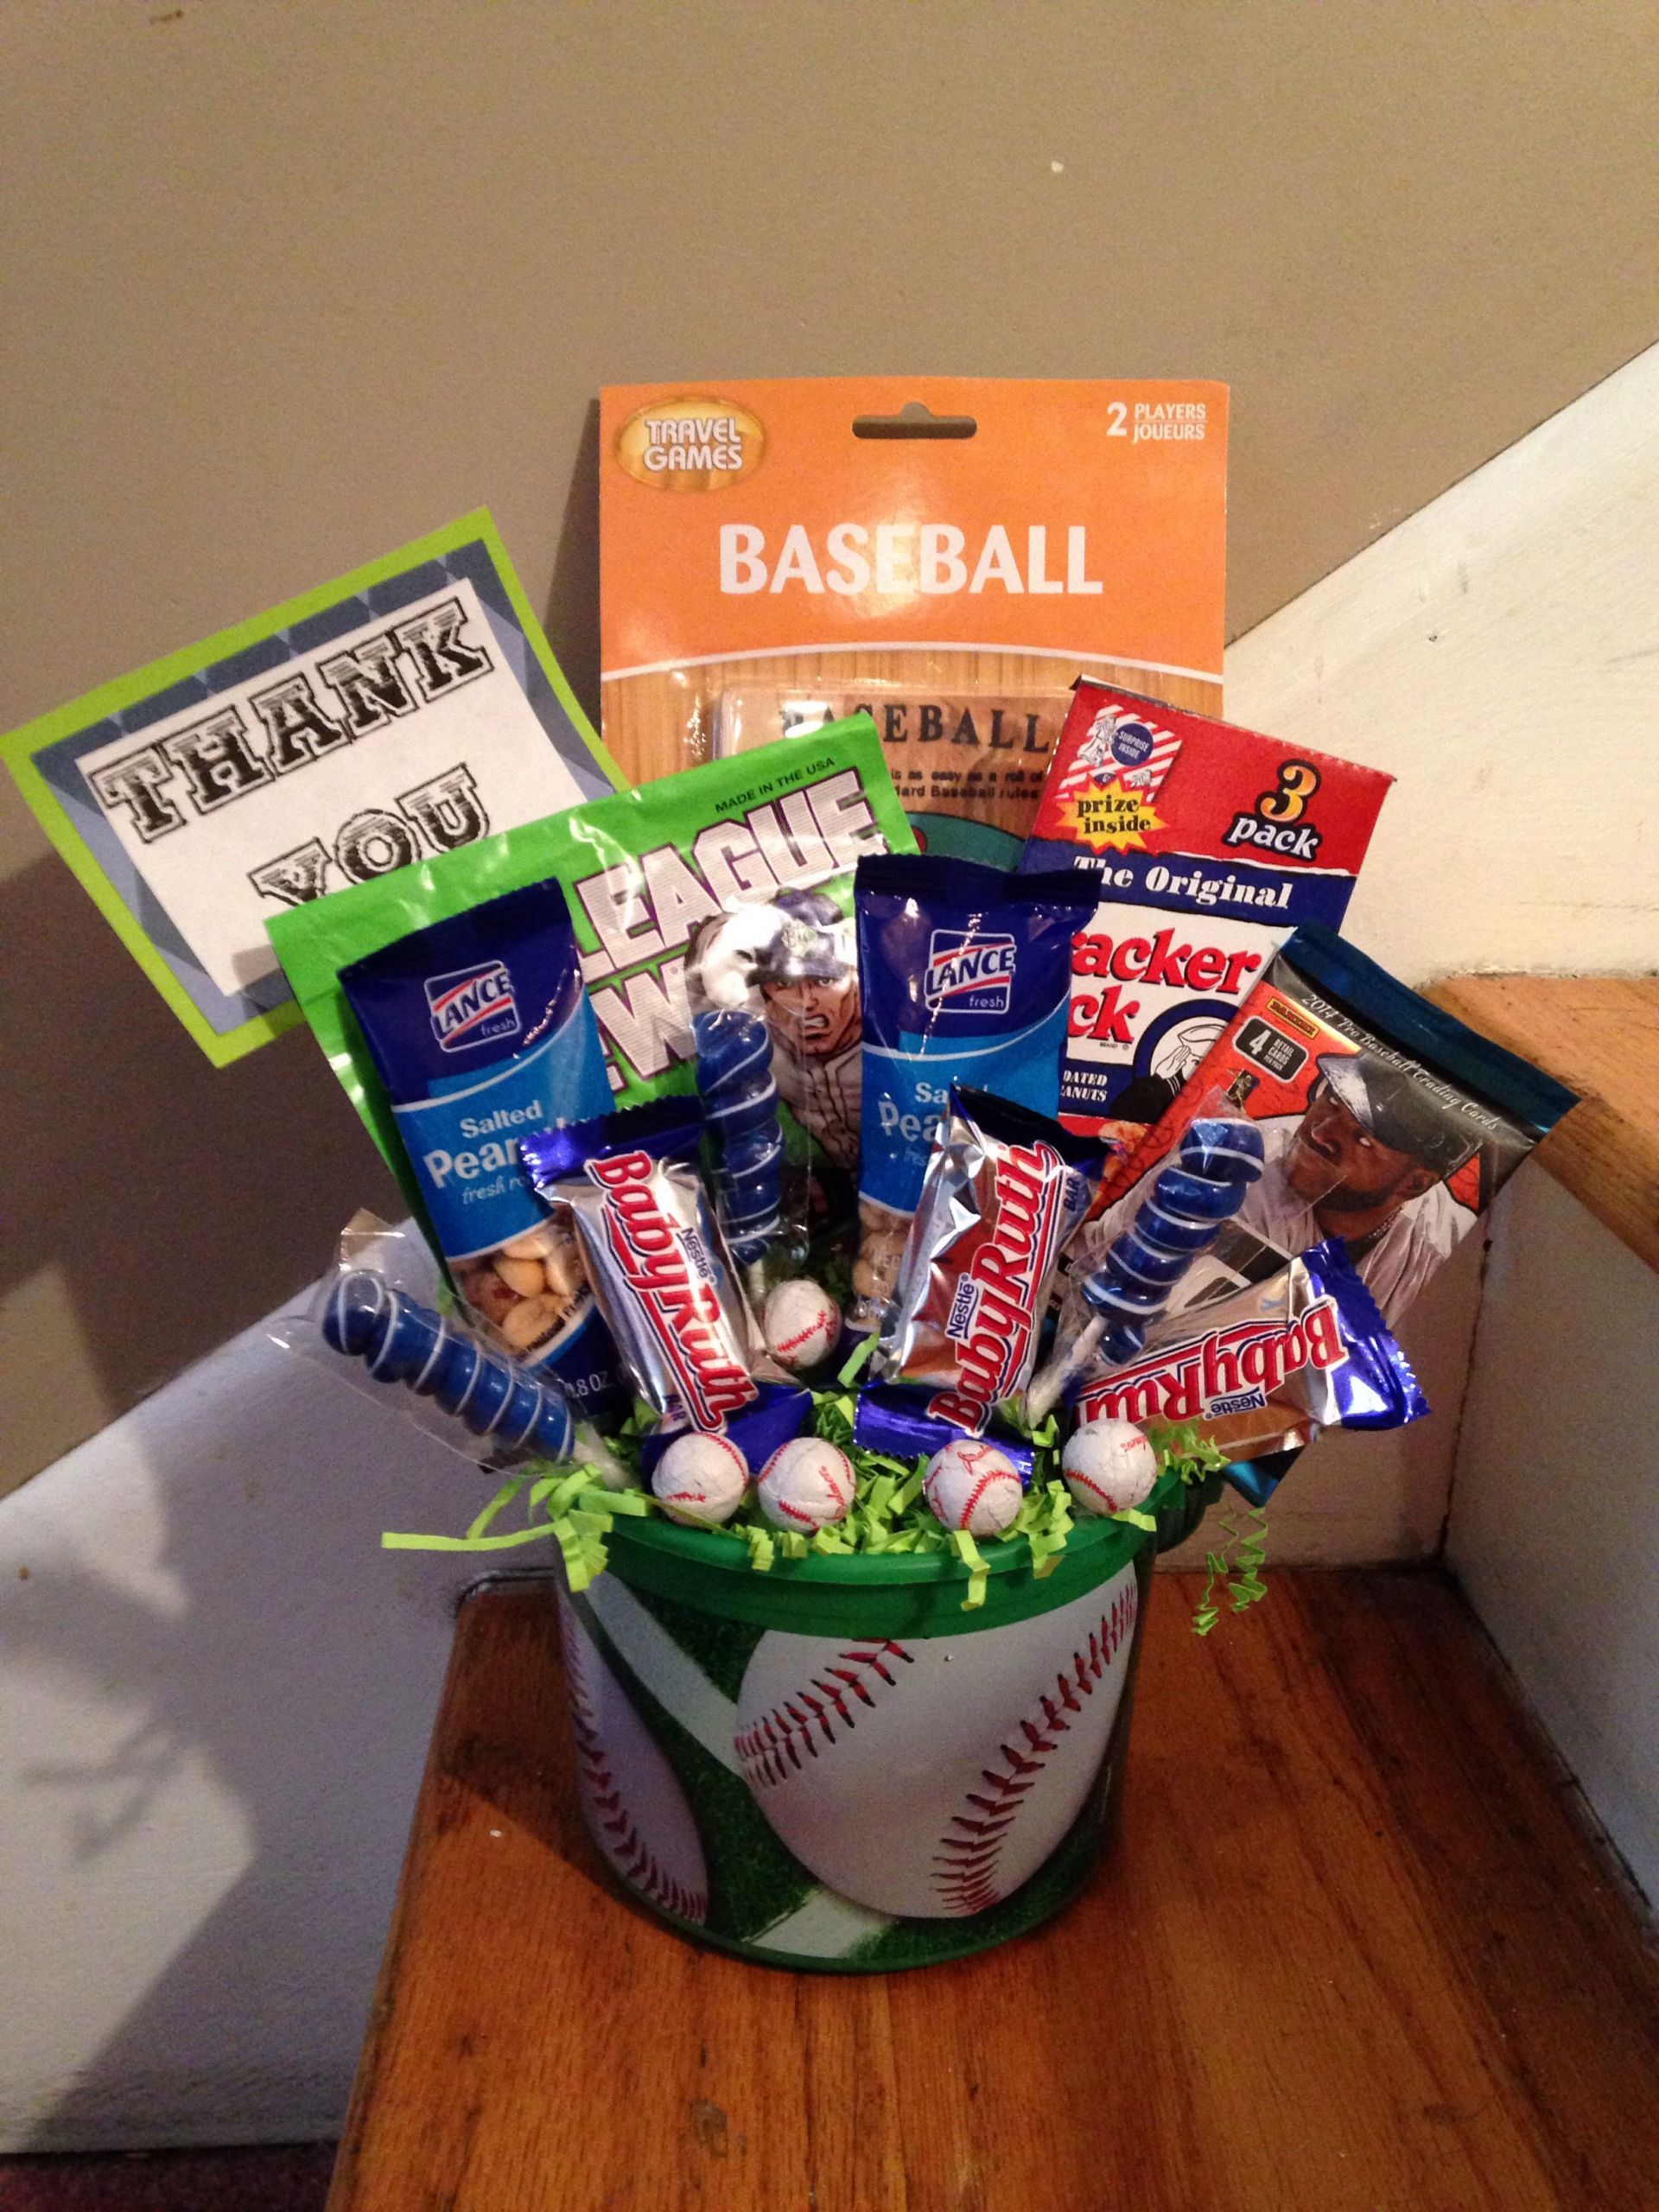 Kids Baseball Gifts
 This would be an awesome thank you t for a baseball T